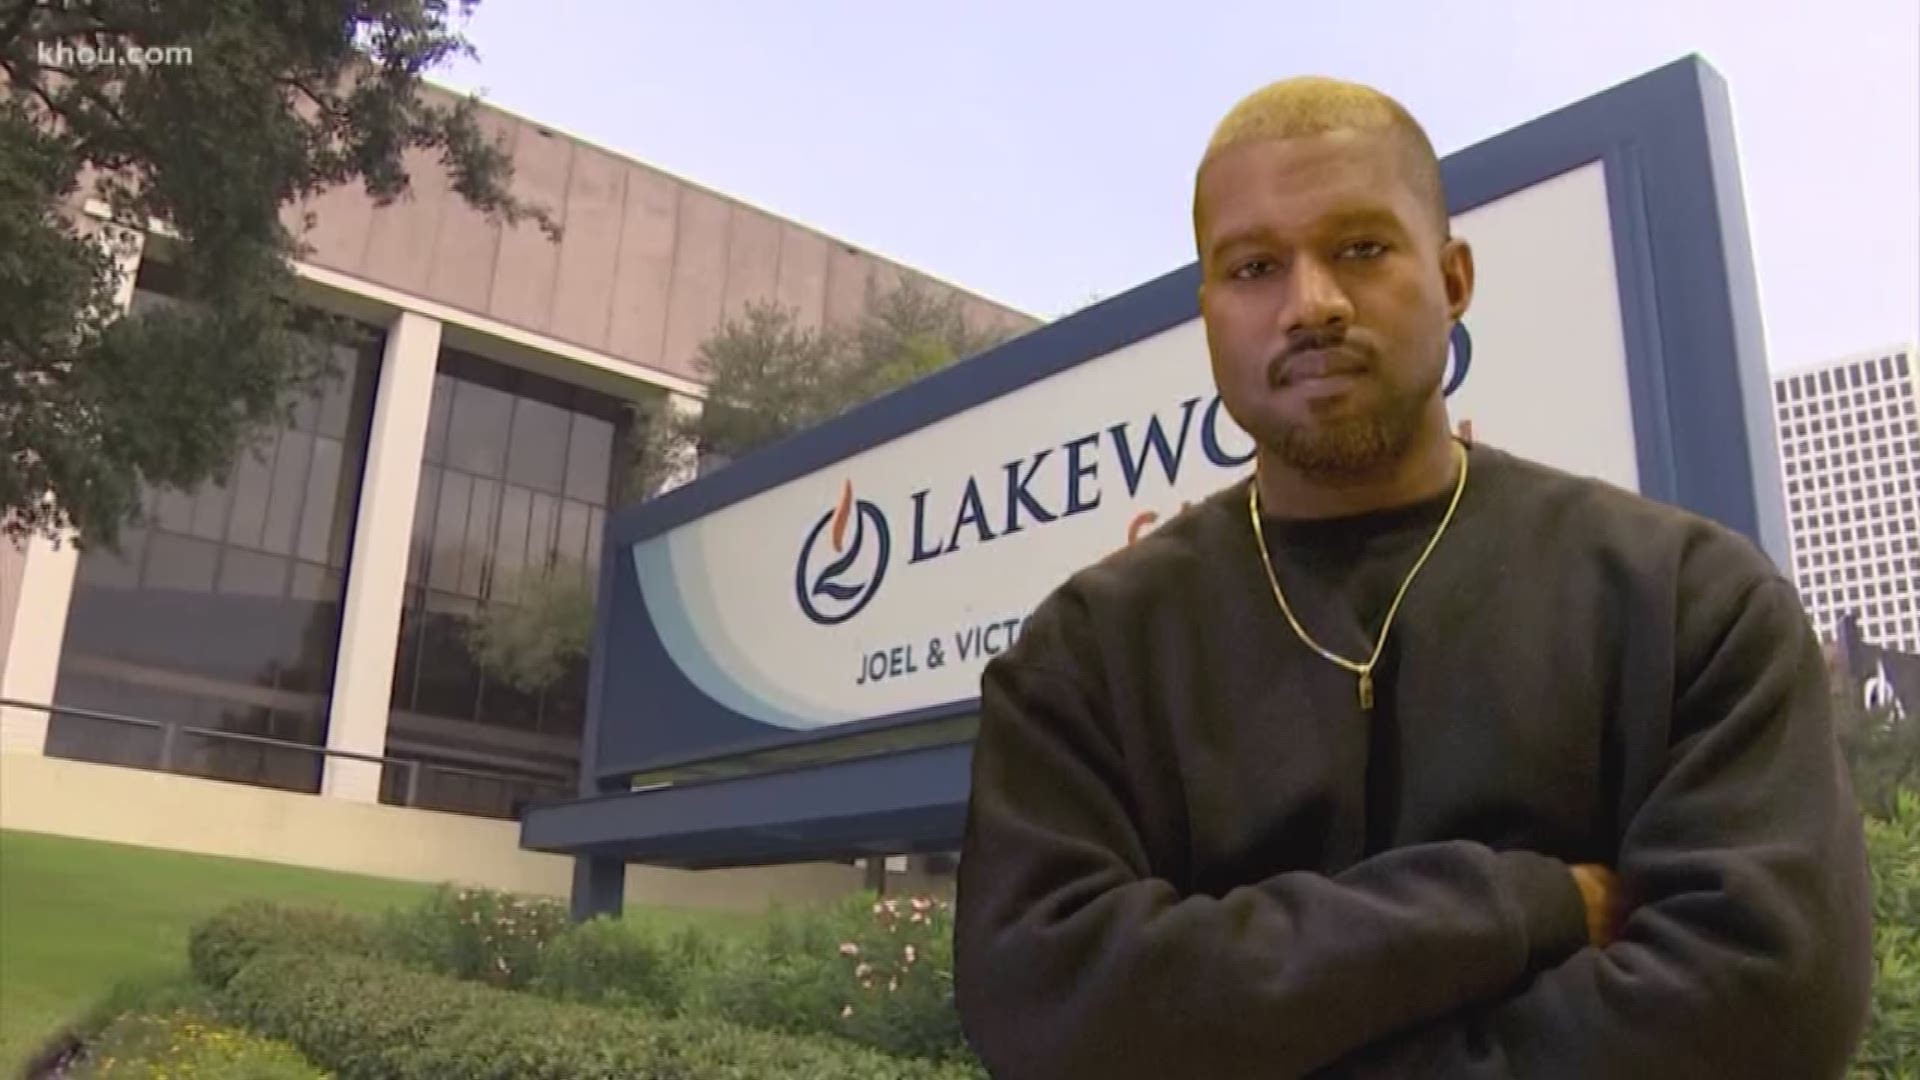 Lakewood Church officials are warning against purchasing tickets from scalpers to Kanye West's Sunday Service.